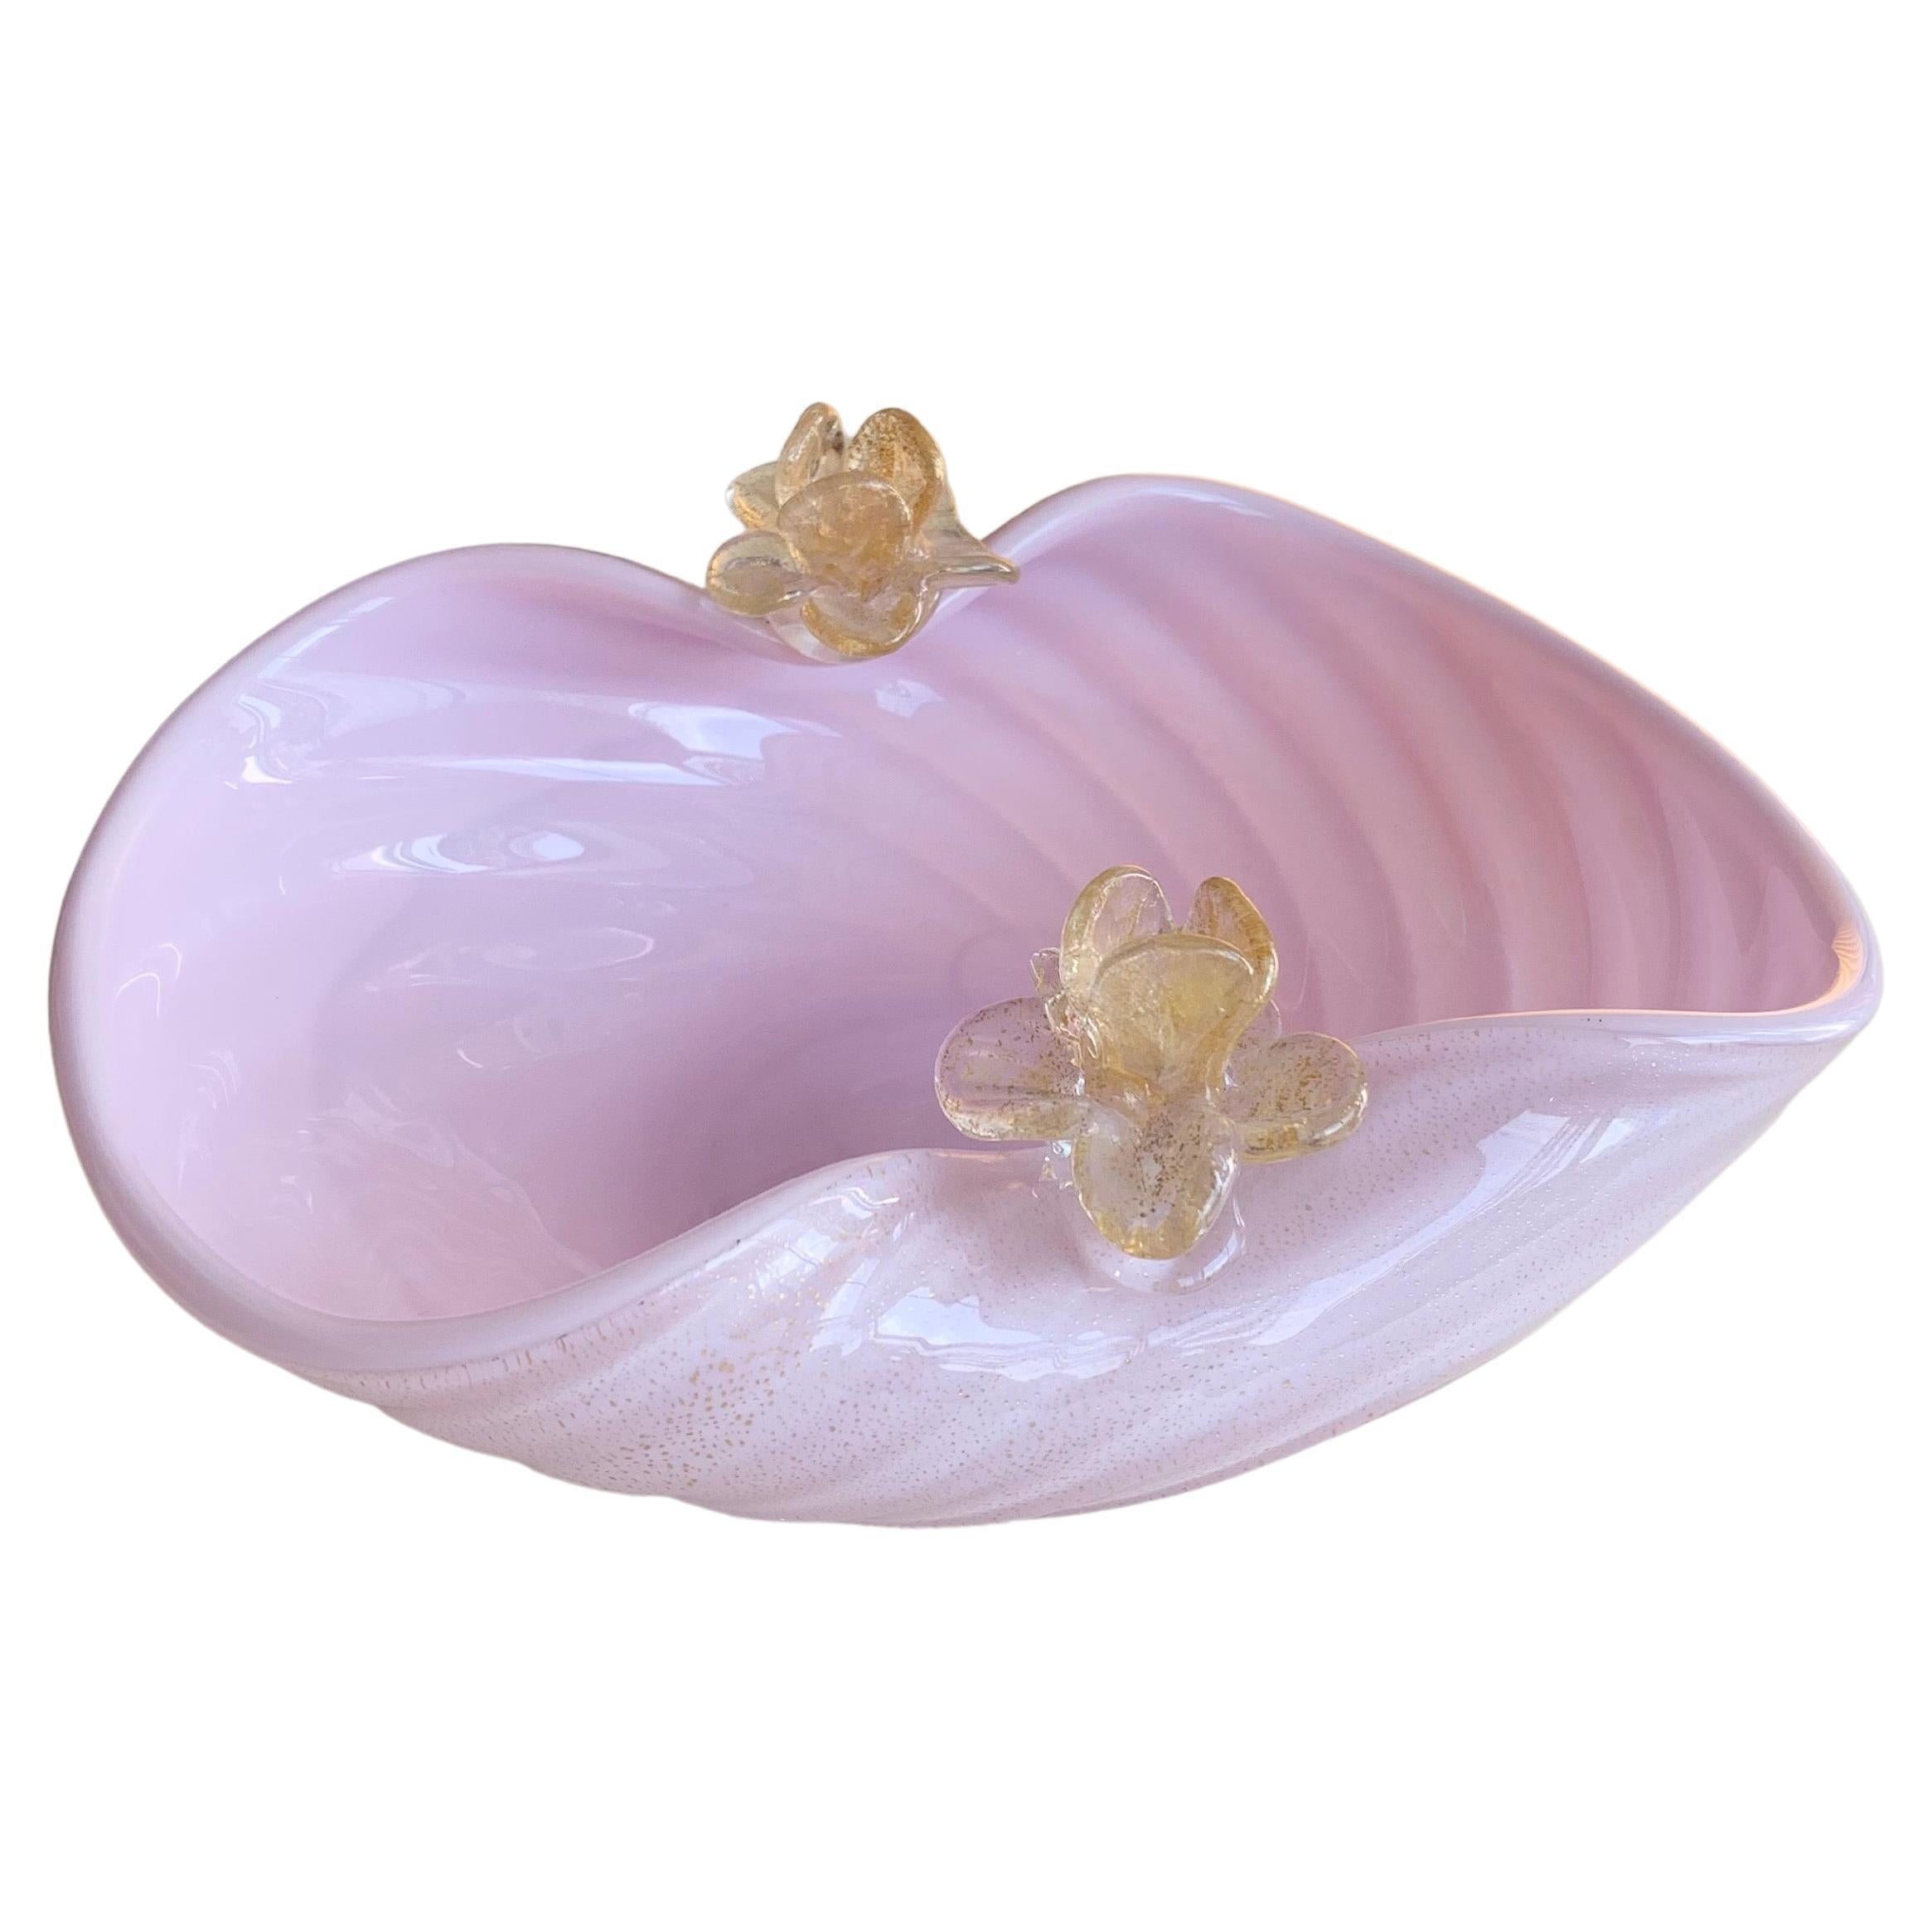 Beautiful vintage Murano pink glass bowl with gold on the outside of the glass. The bowl is mouth blown with swirl and has two flowers on the rim in crystal glass with gold. Handmade in Italy, 1960s. Measures: L:22cm, W:16cm, H:9.5cm.
 